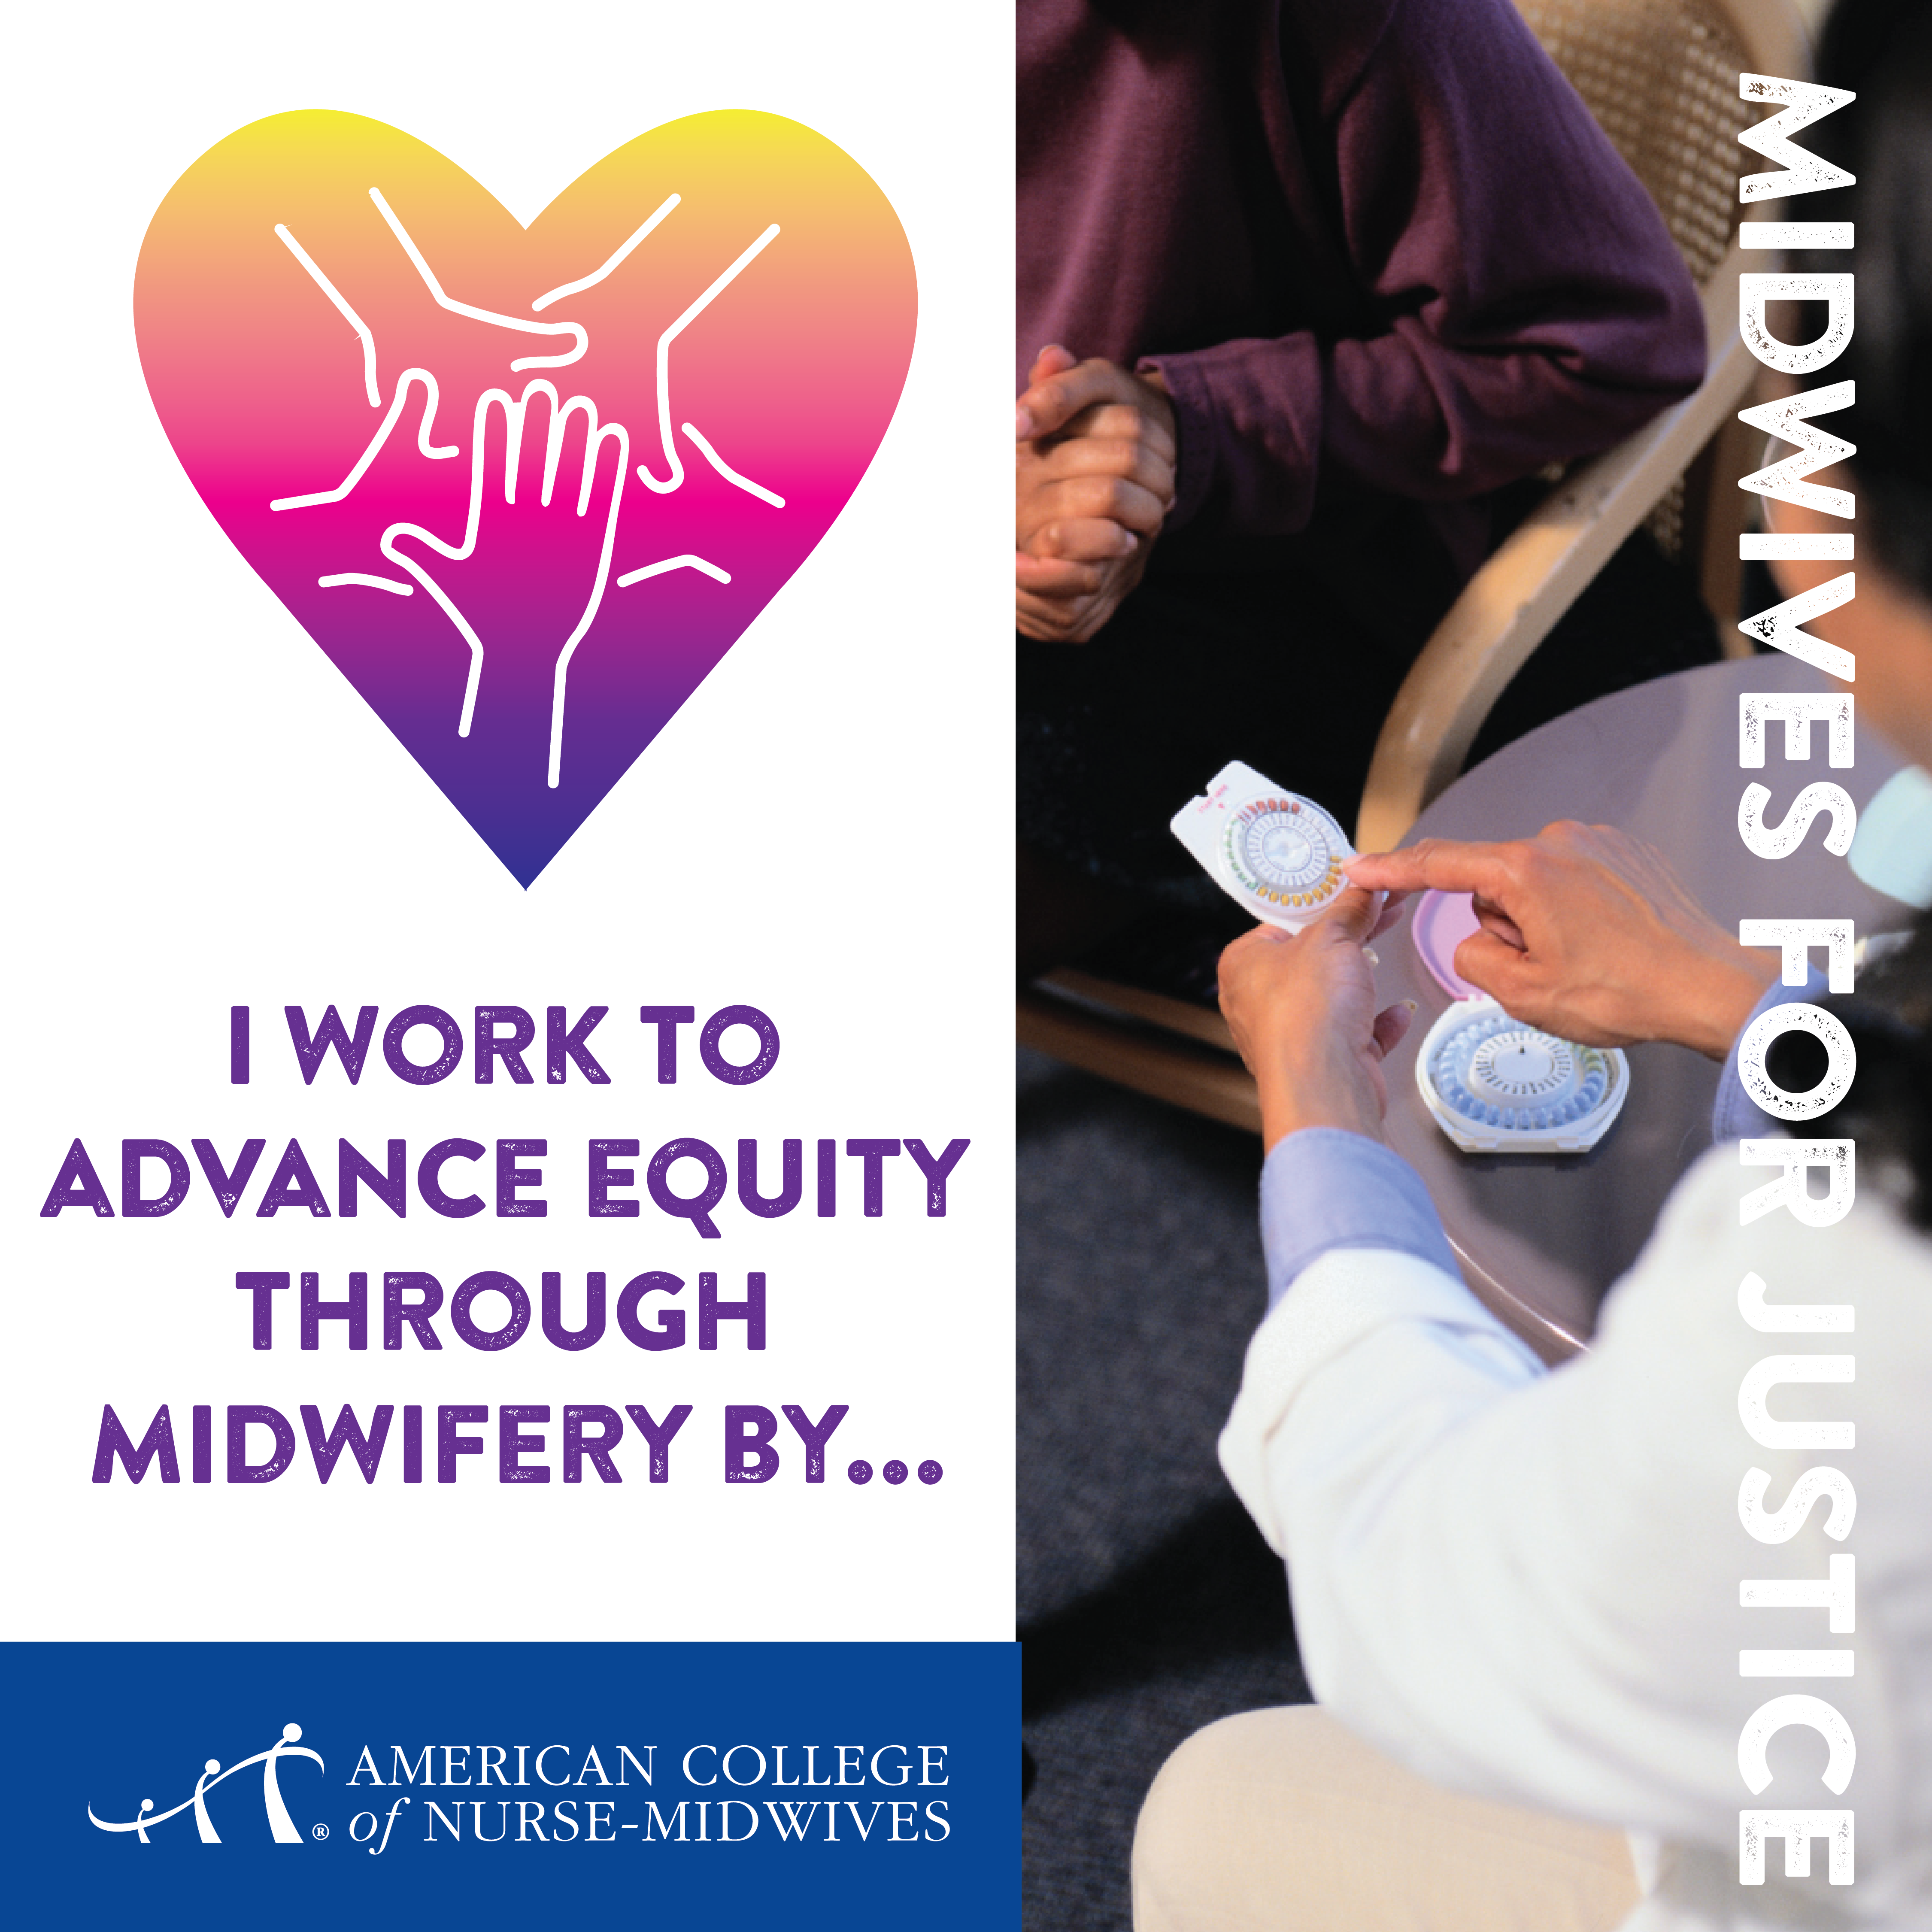 NMW2022 - Midwives for Justice - Social Media 3